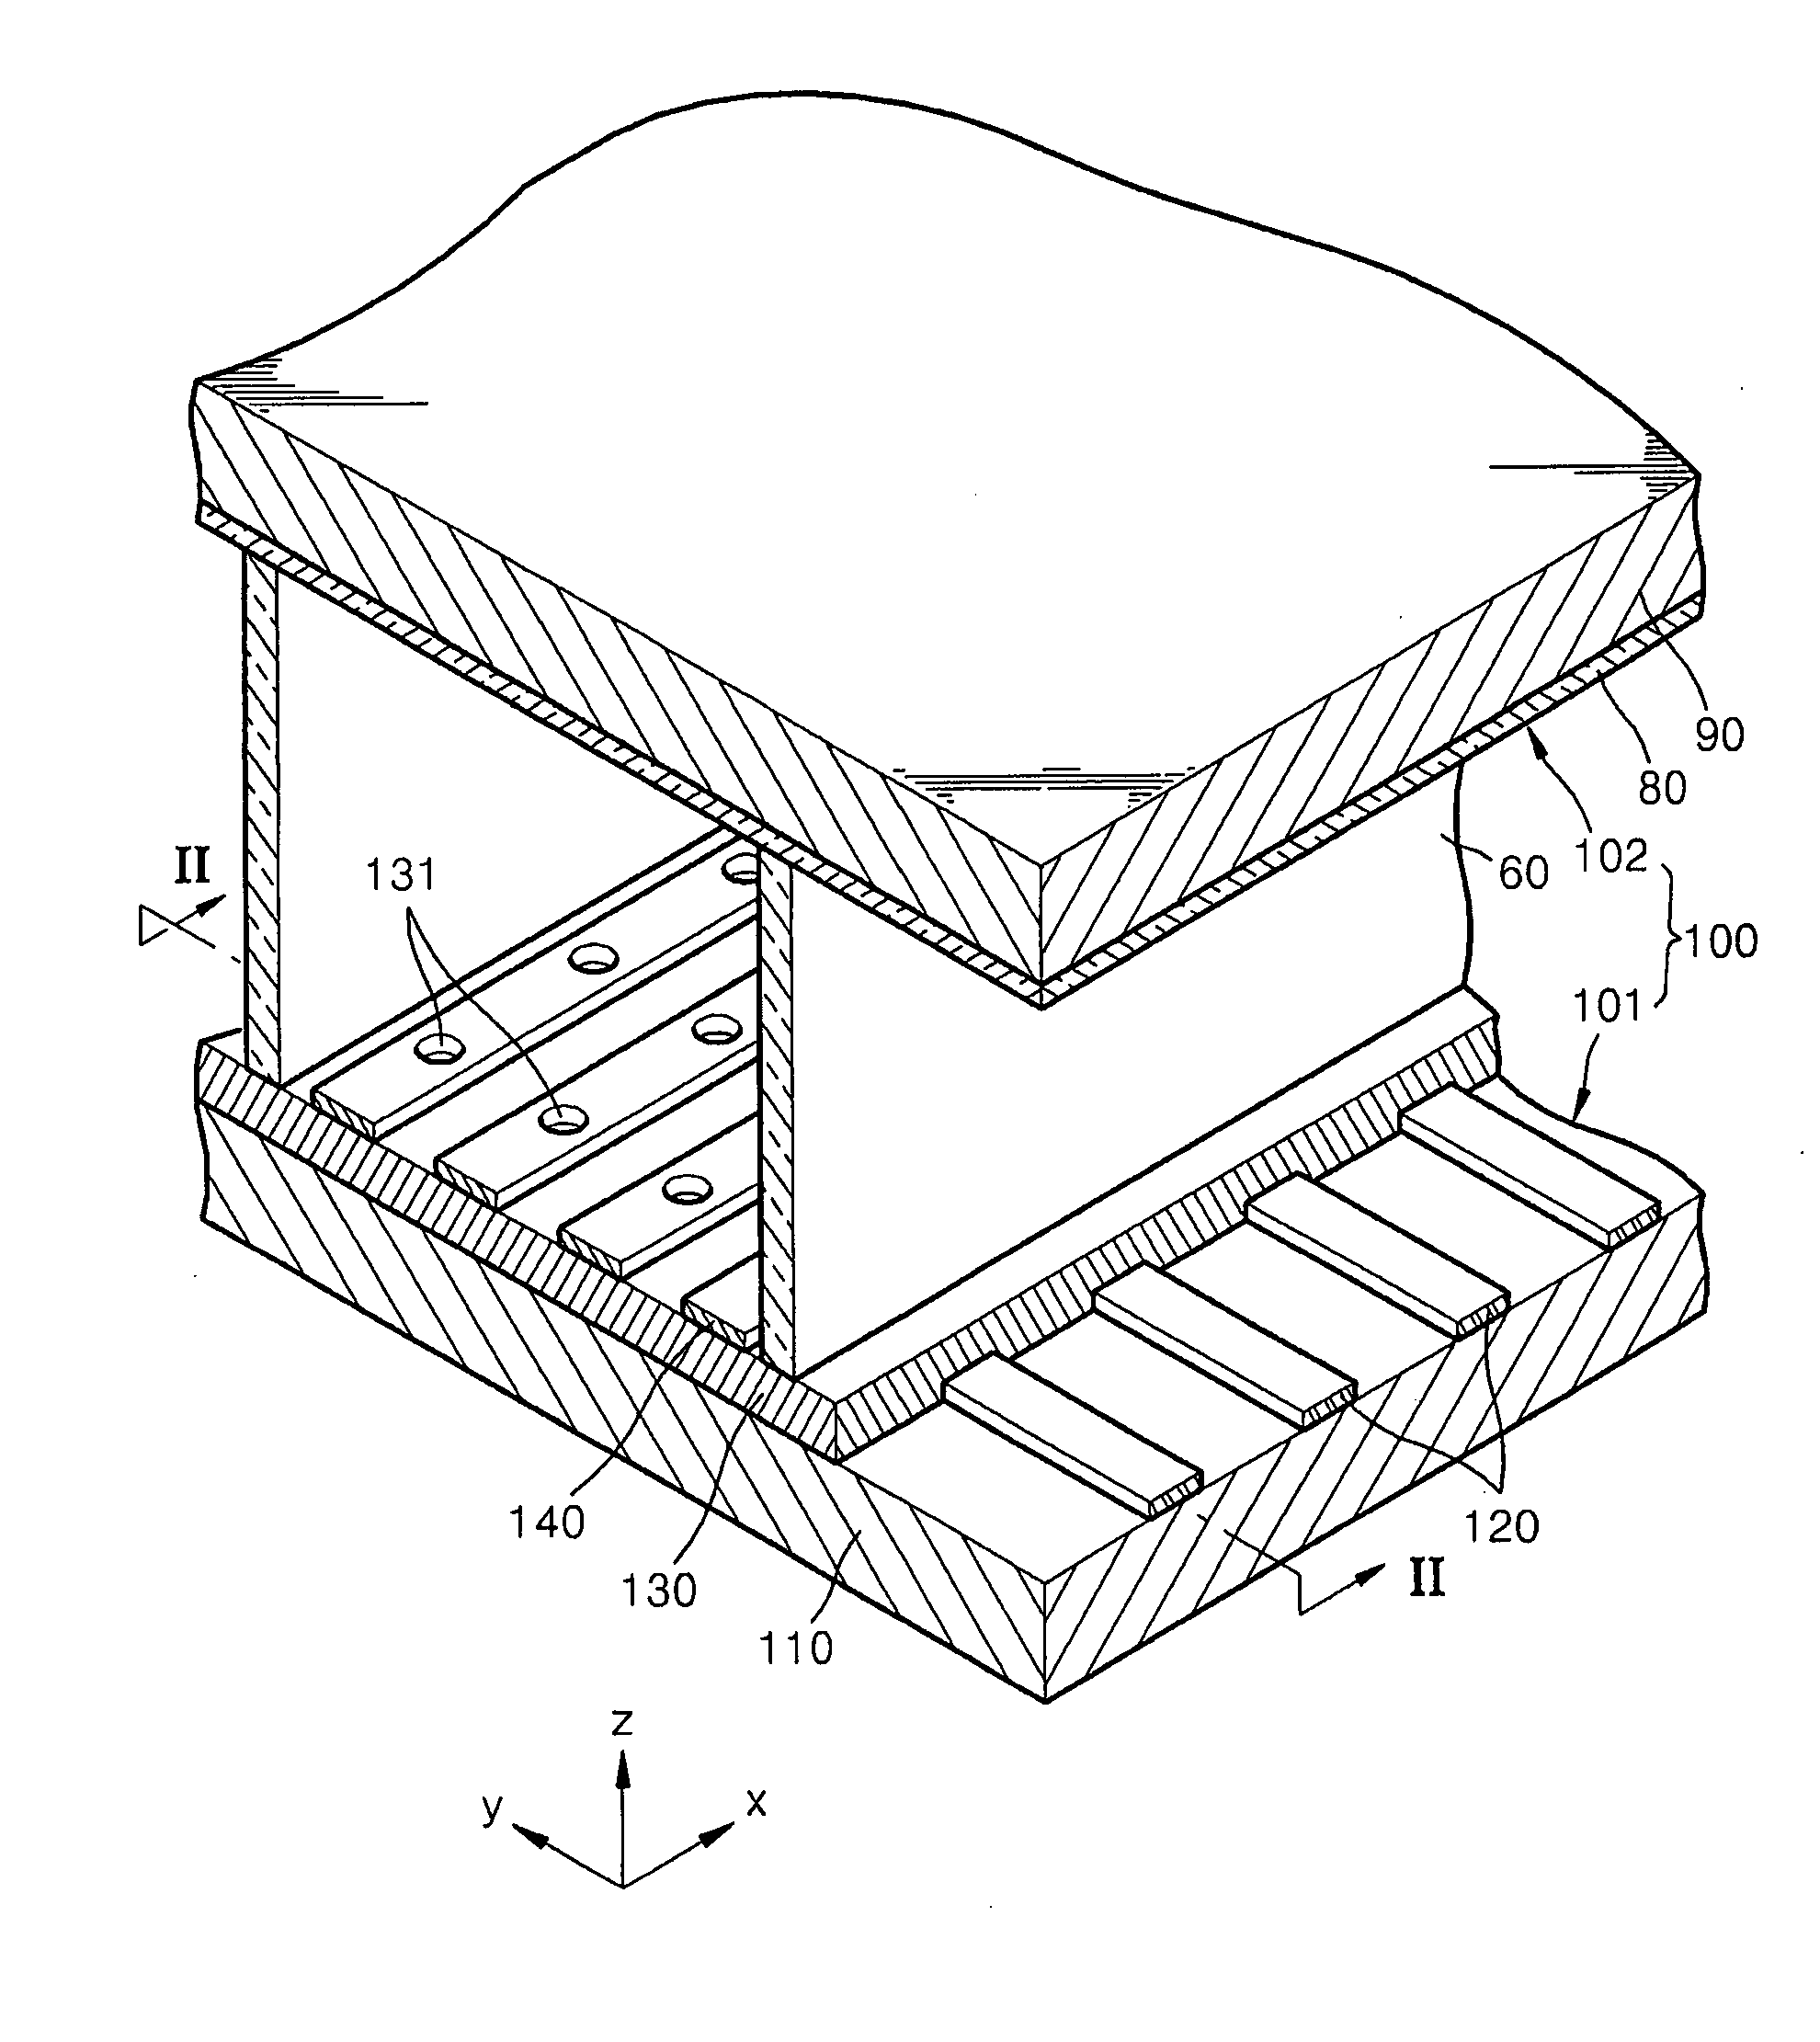 Composition for forming electron emission sources, method of manufacturing the same, and electron emission sources and electron emission device manufactured using the method